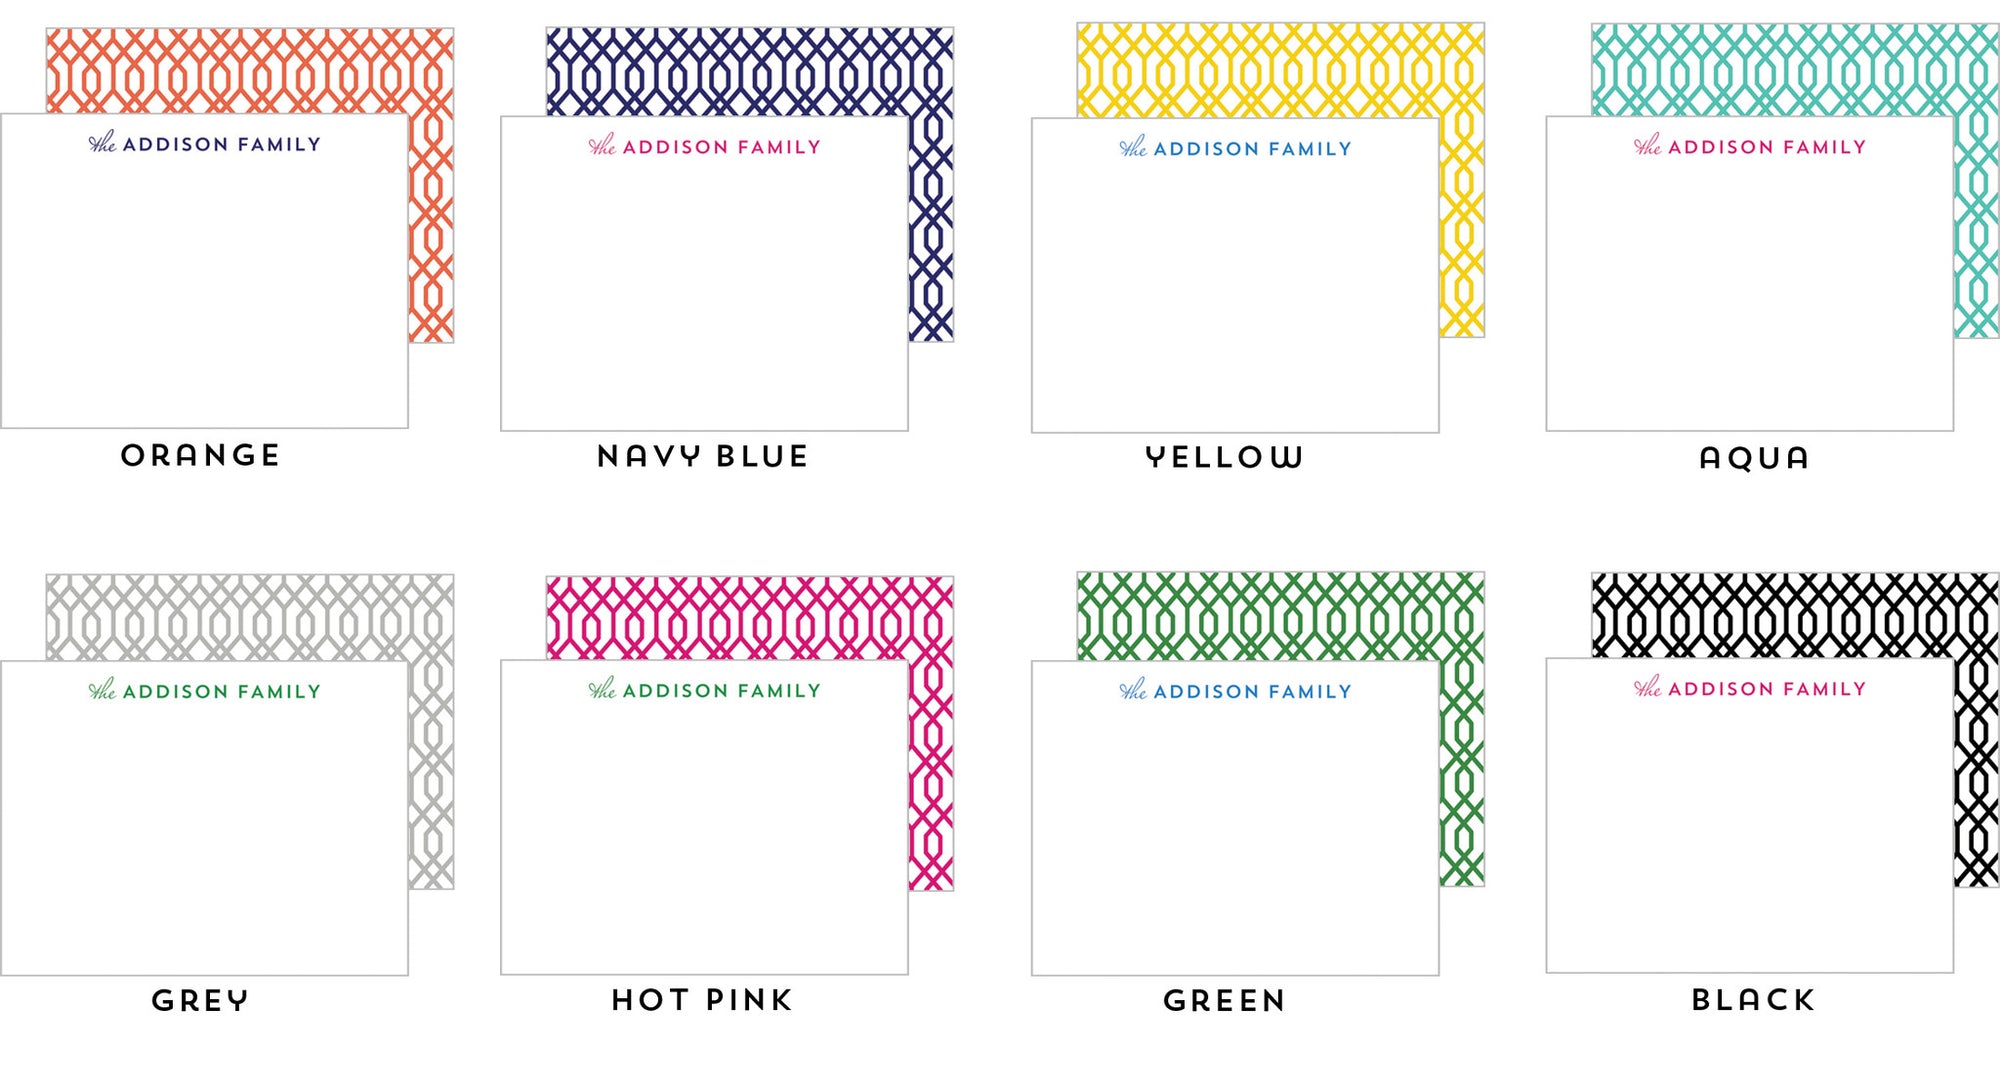 Geometric Trellis Personalized Flat Notecards - More Colors